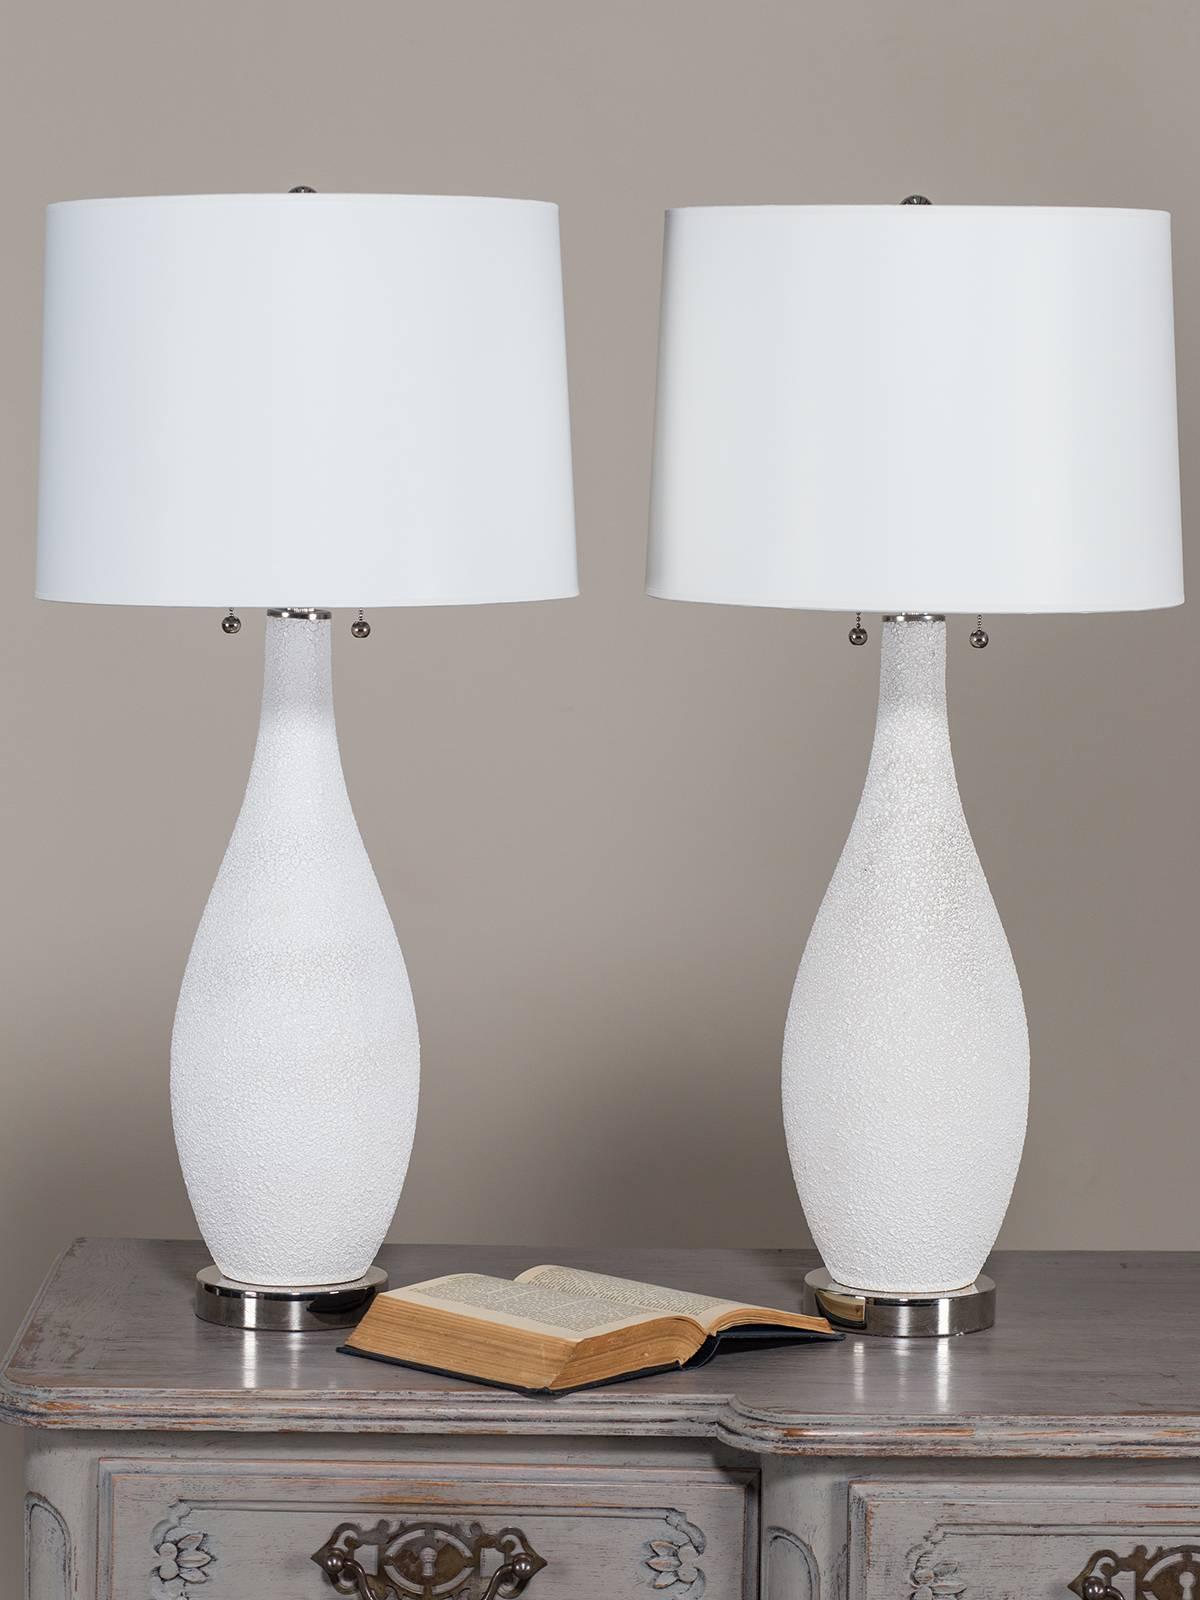 Receive our new selections direct from 1stdibs by email each week. Please click Follow Dealer below and see them first!

The elegant shape of this pair of Mid-Century vintage lamps, circa 1950 makes them eminently desirable for a contemporary